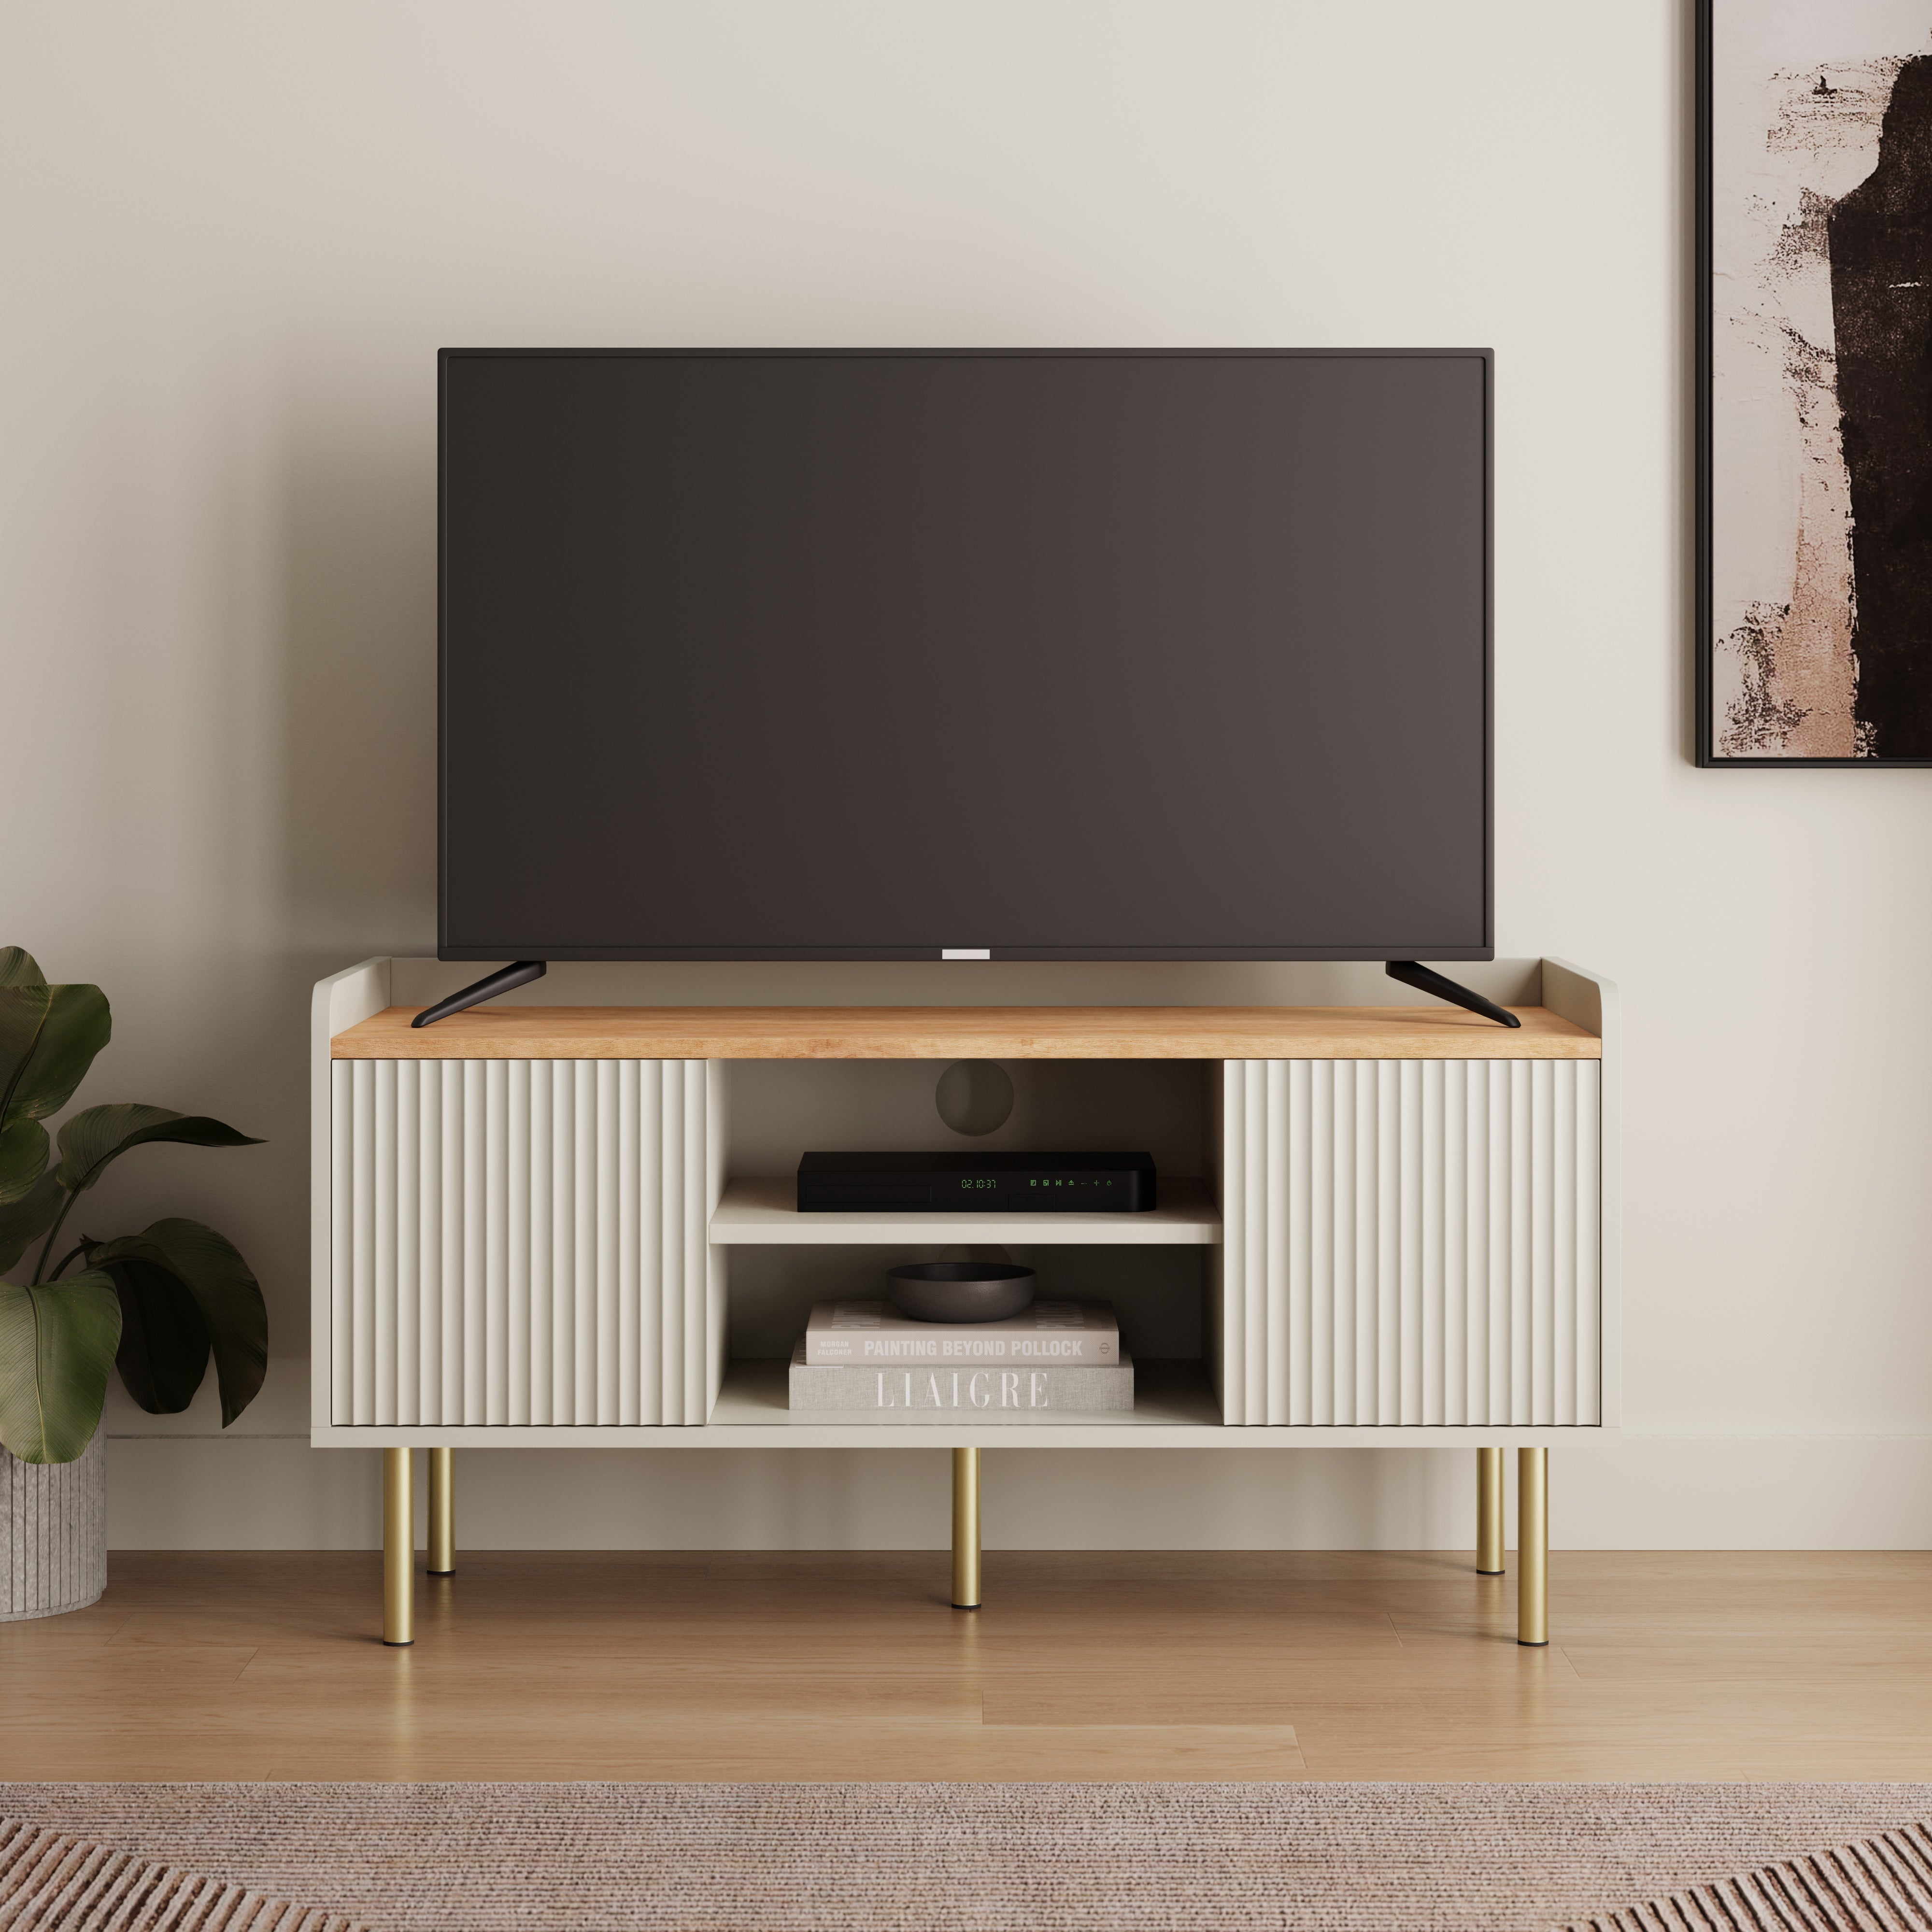 Georgi Small TV Stand for TVs up to 42"